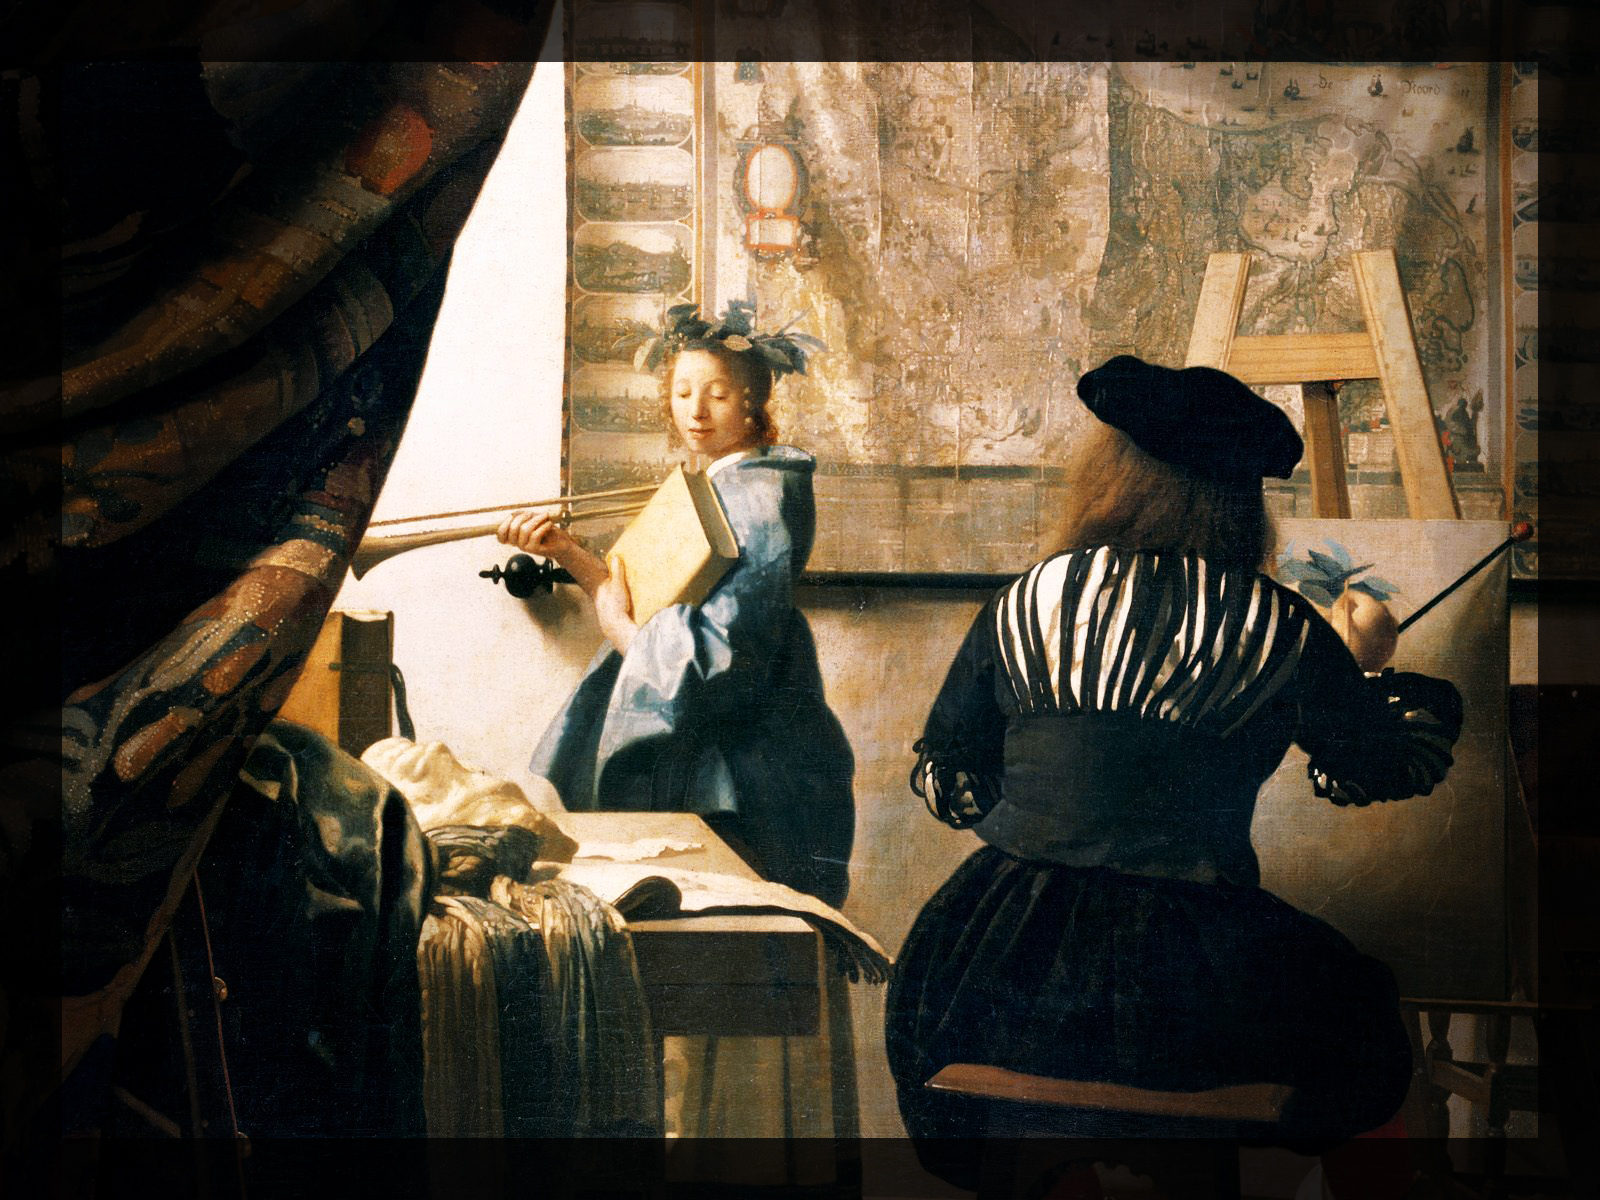 Painting by Vermeer – The Art of Painting